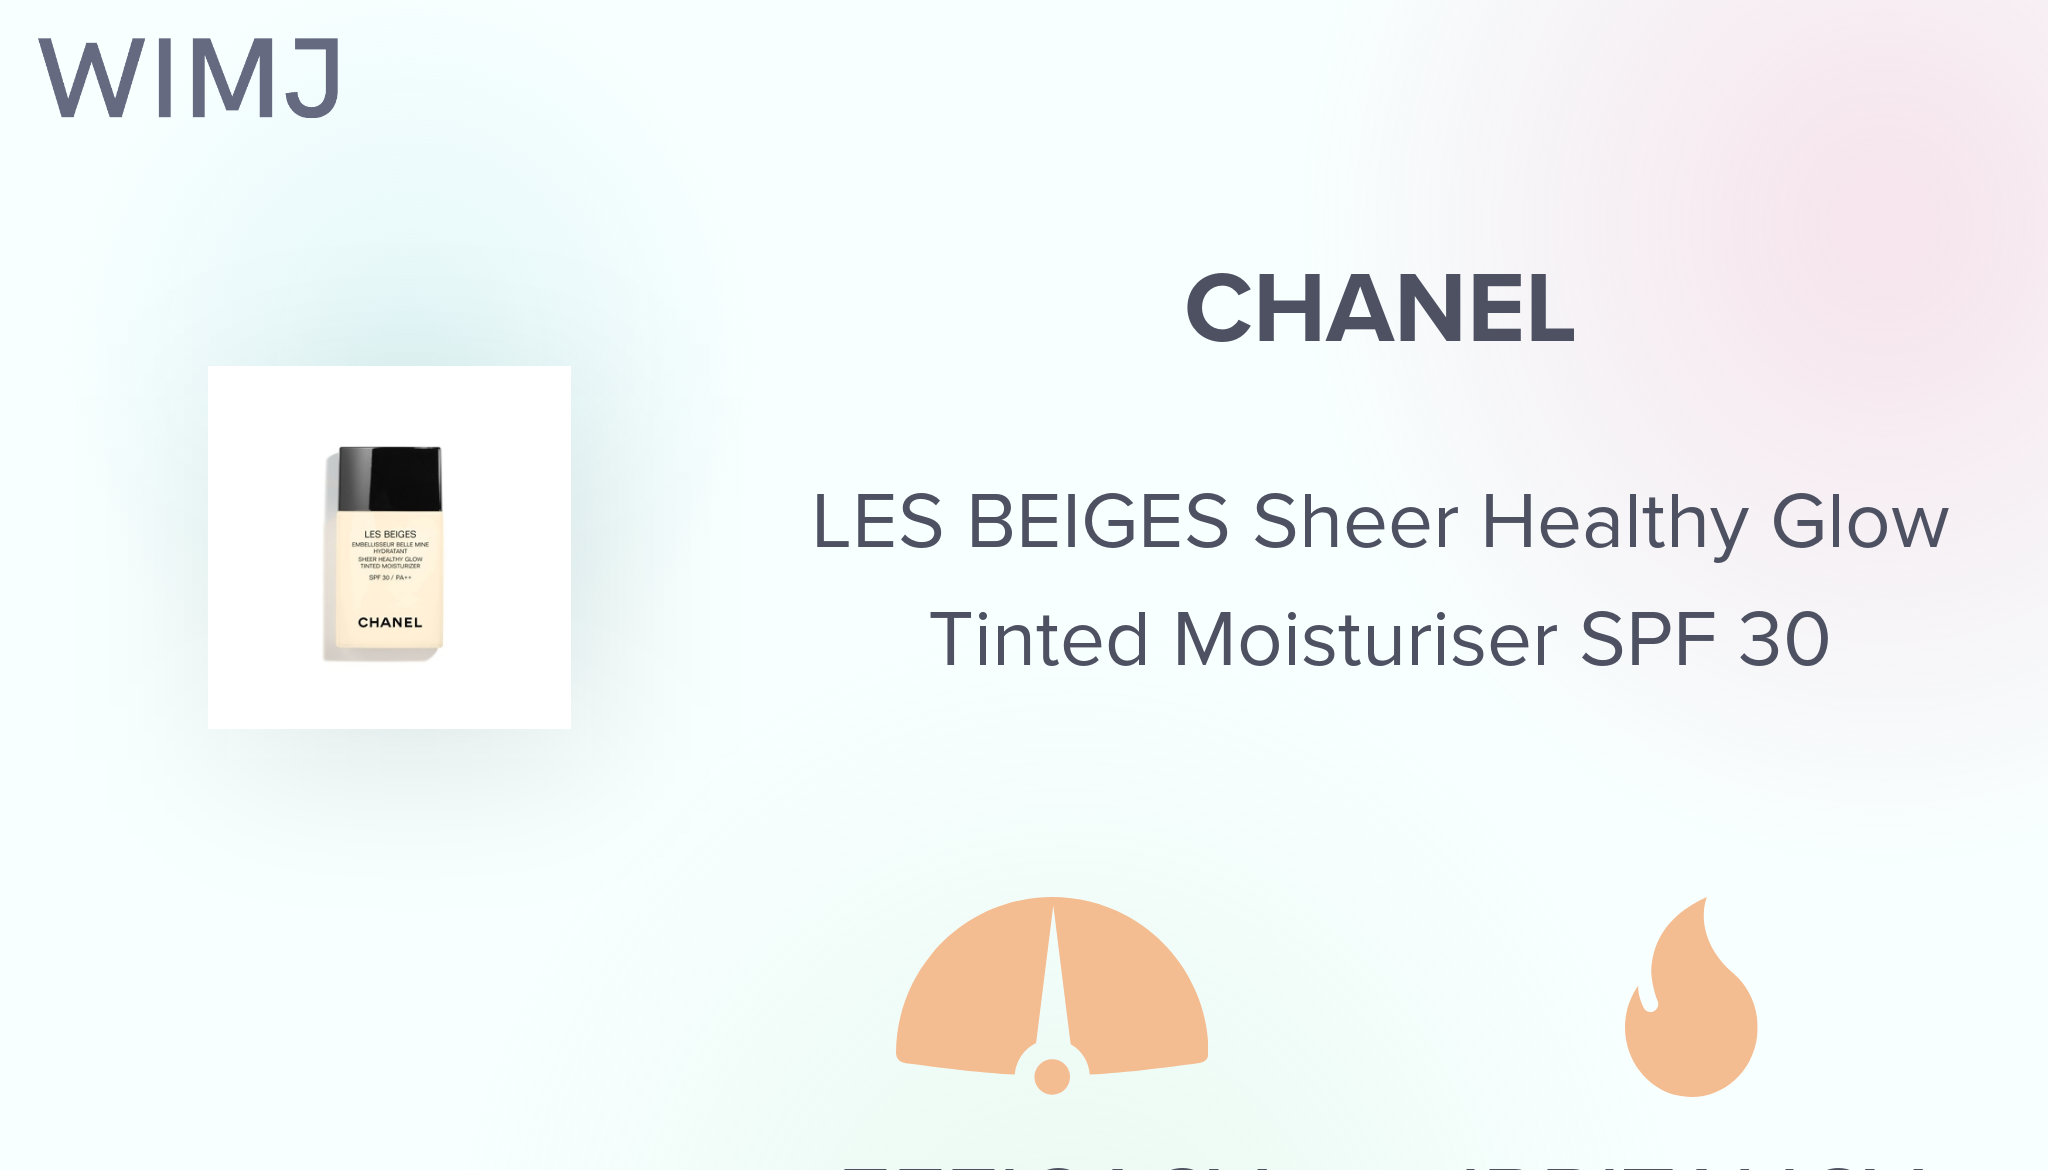 Review: CHANEL - LES BEIGES Sheer Healthy Glow Tinted Moisturiser